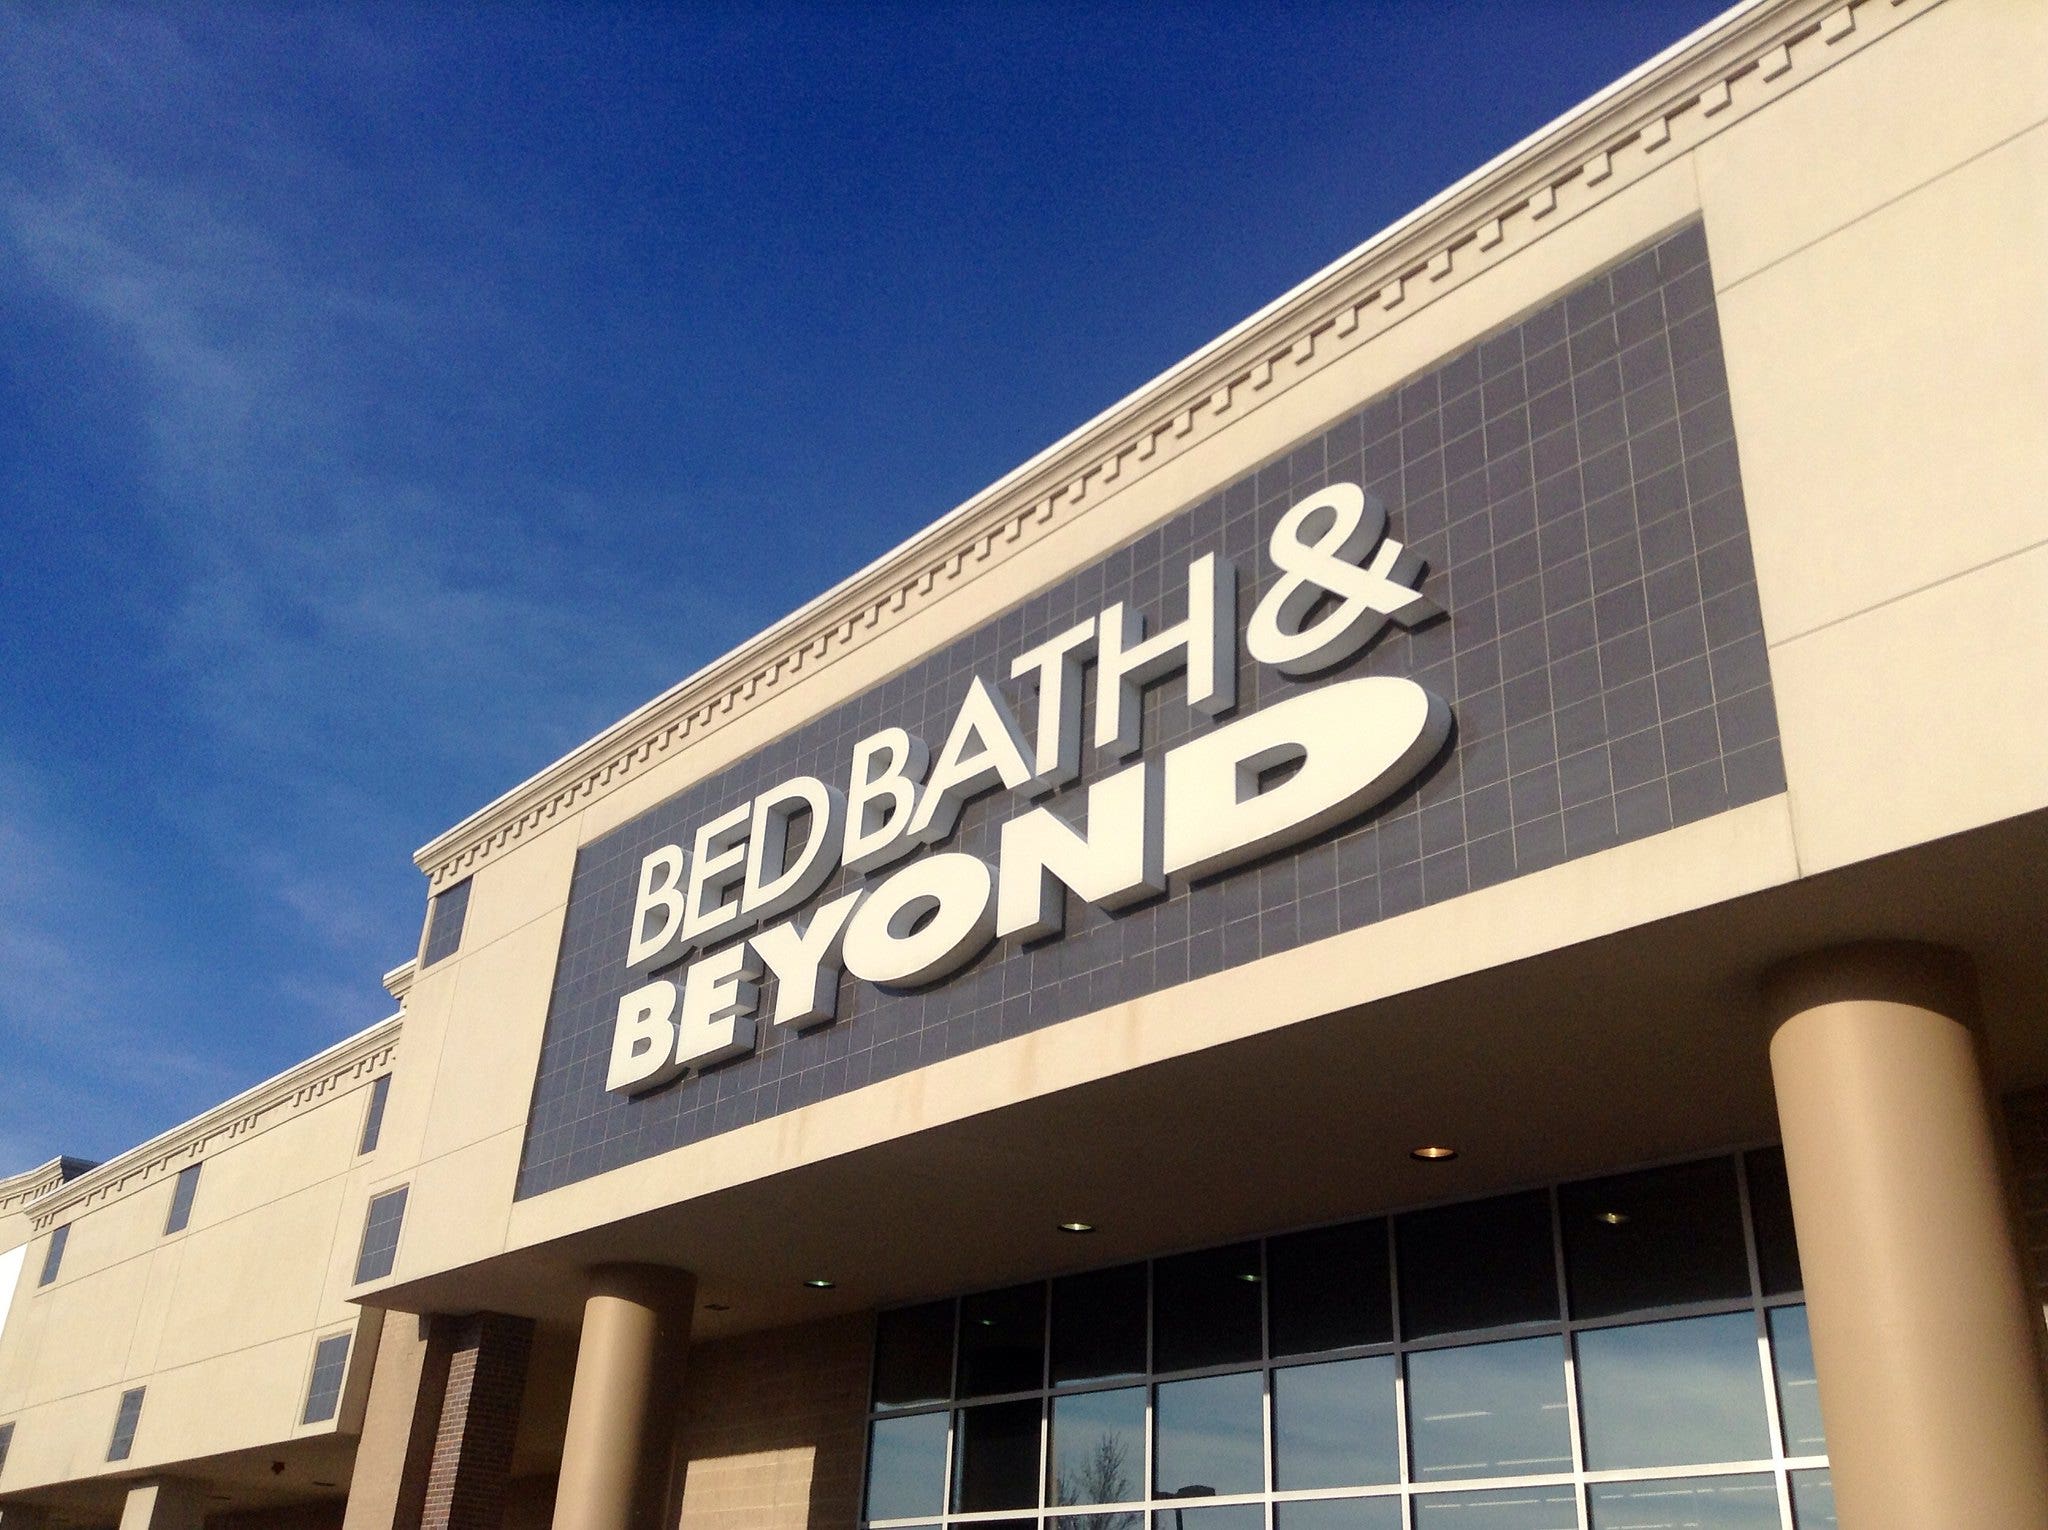 Bed Bath & Beyond Stock Is Soaring Today: What's Going On?